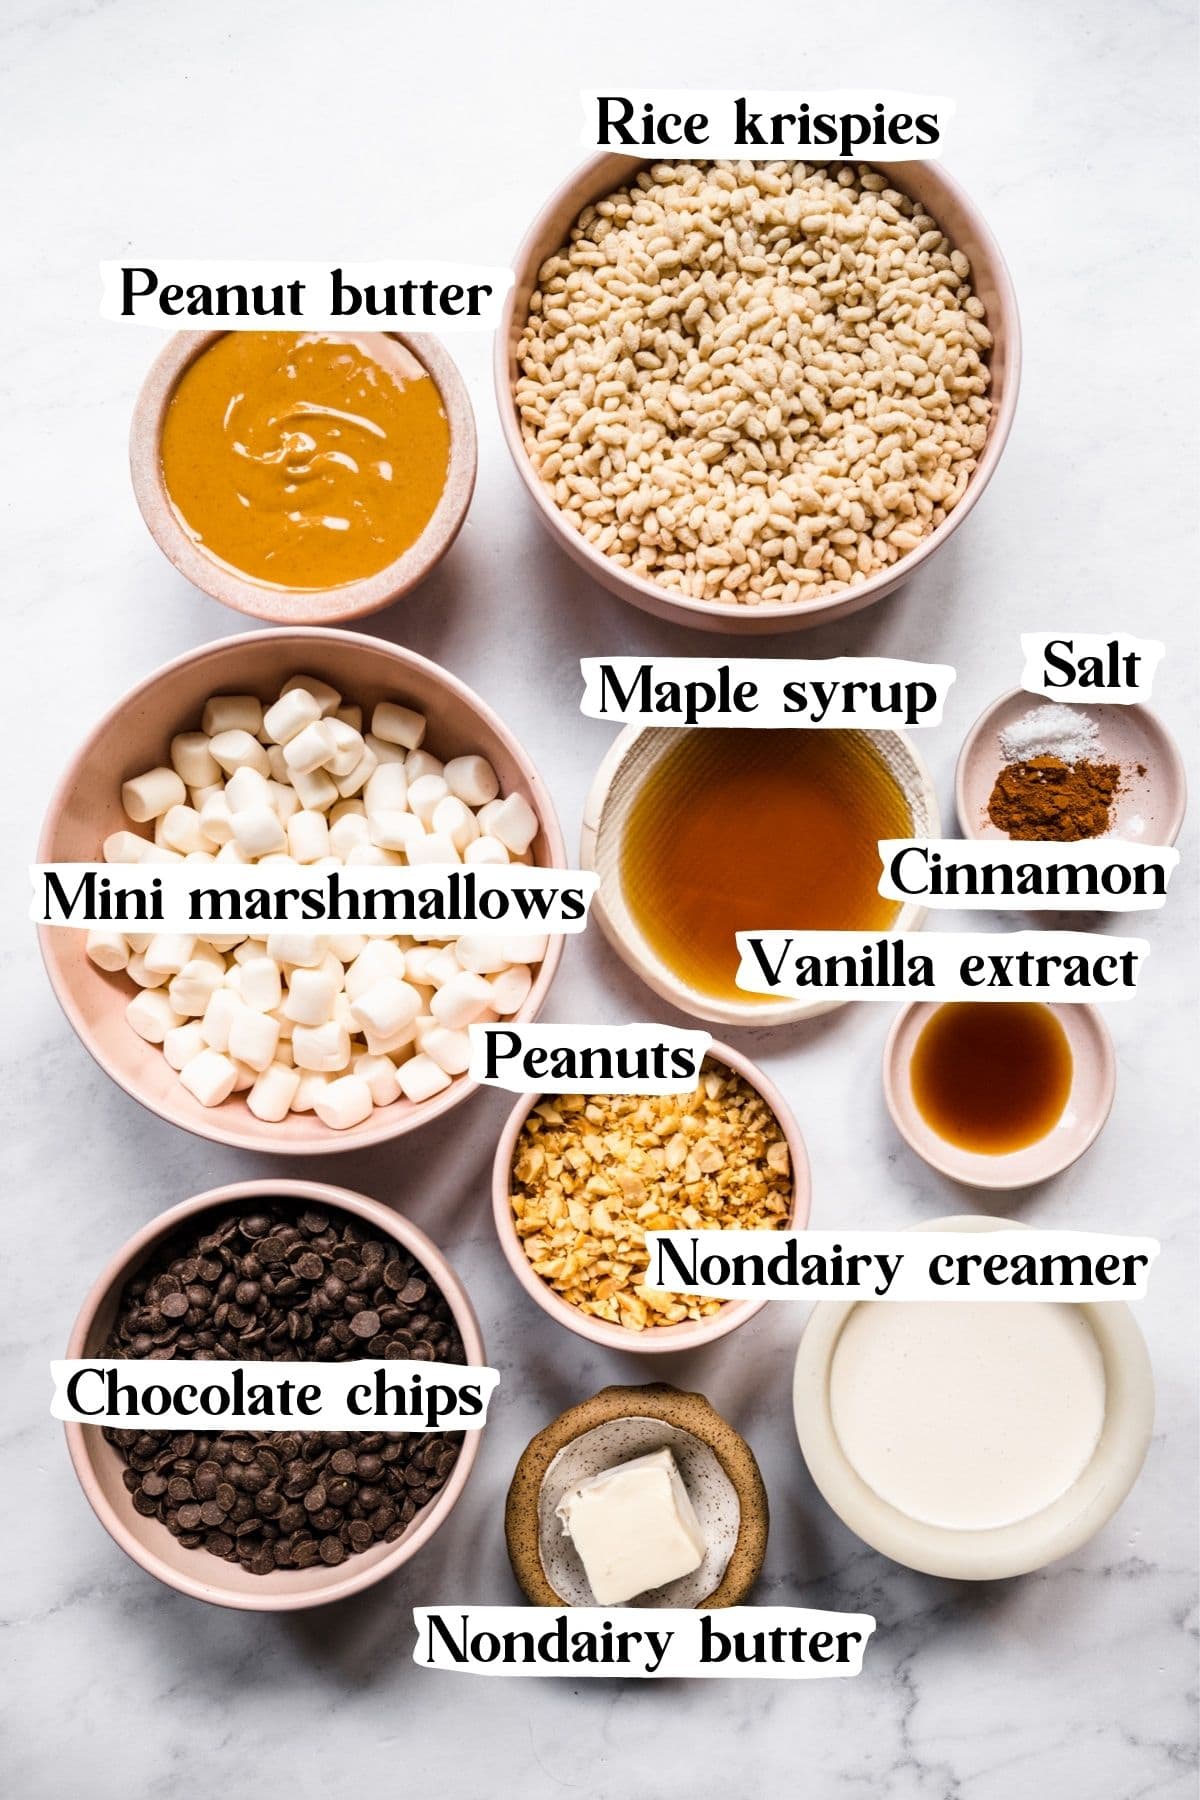 Overhead view of rice krispie ingredients, including chocolate chips and peanuts.